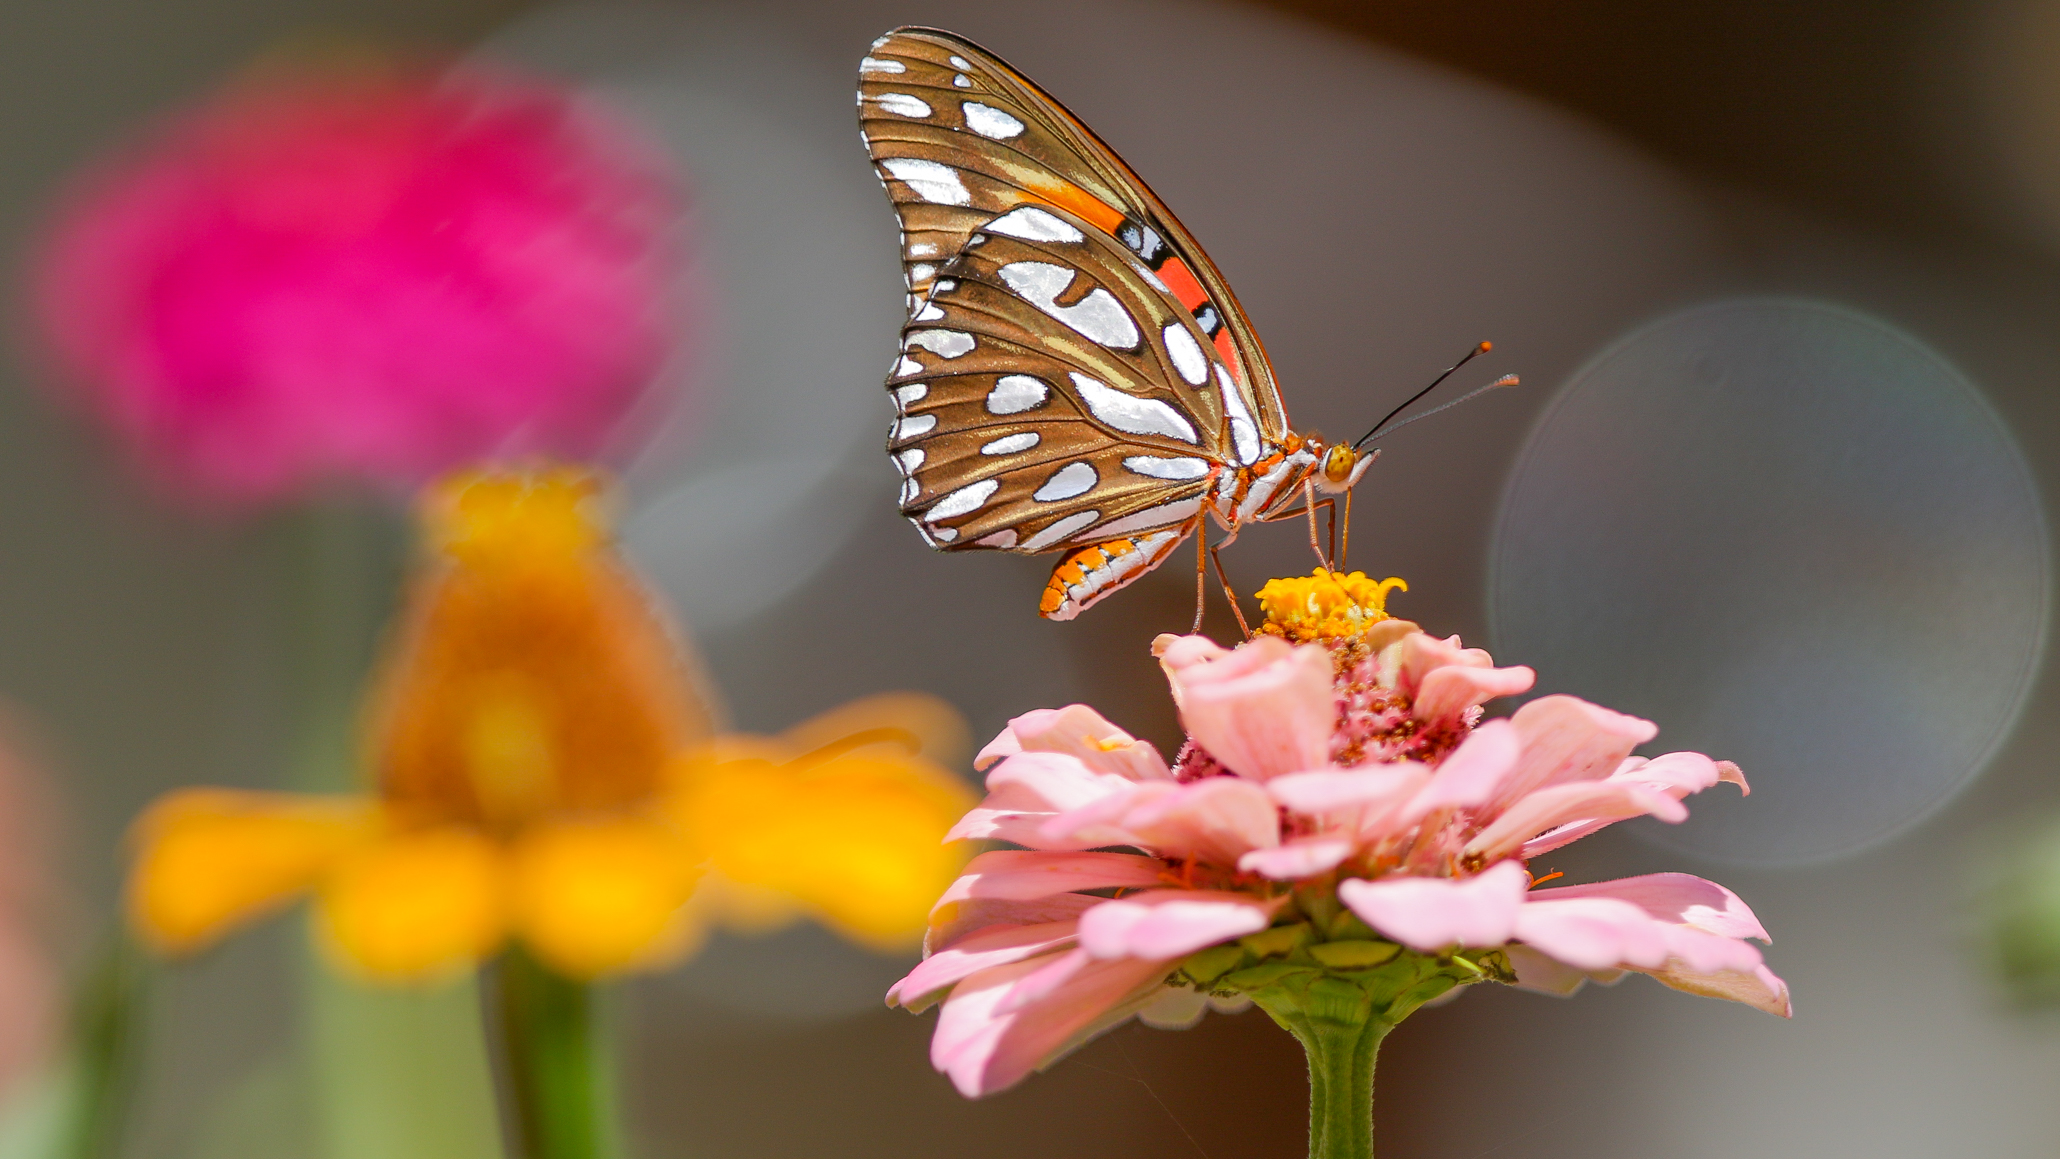 No matter the size of your garden, it can be a magnet for attracting butterflies, hummingbirds, and other creatures. Smart garden tech can free up time so you can enjoy nature's show. Image: Digitized House Media.